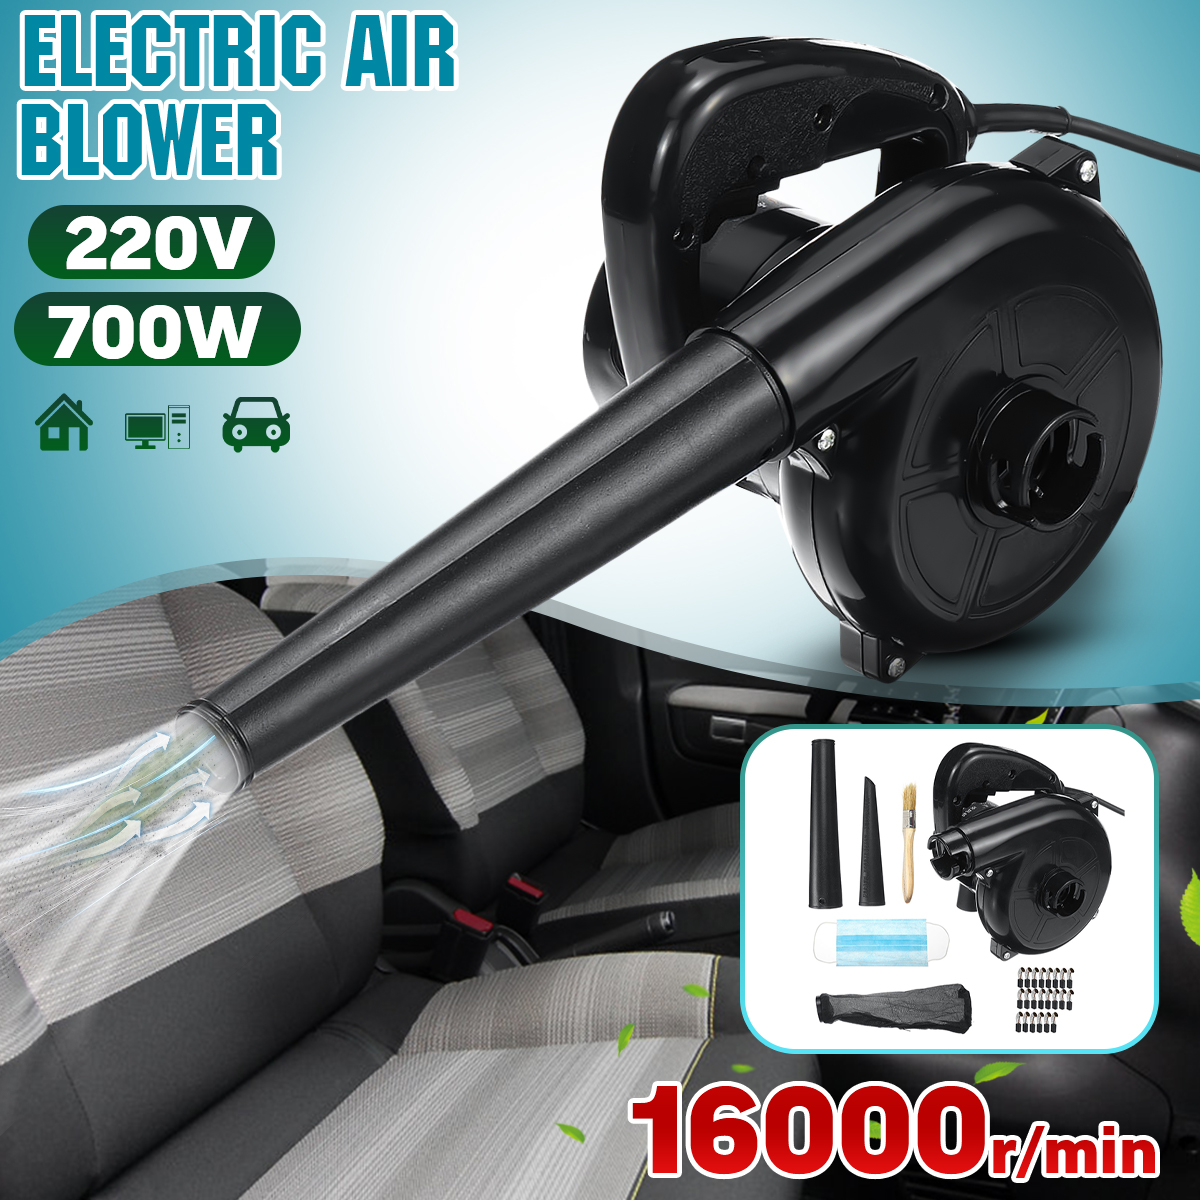 700W-220V-Electric-Air-Blower-Hand-Operated-Car-Computer-Vacuum-Dust-Removing-Cleaner-1648662-1